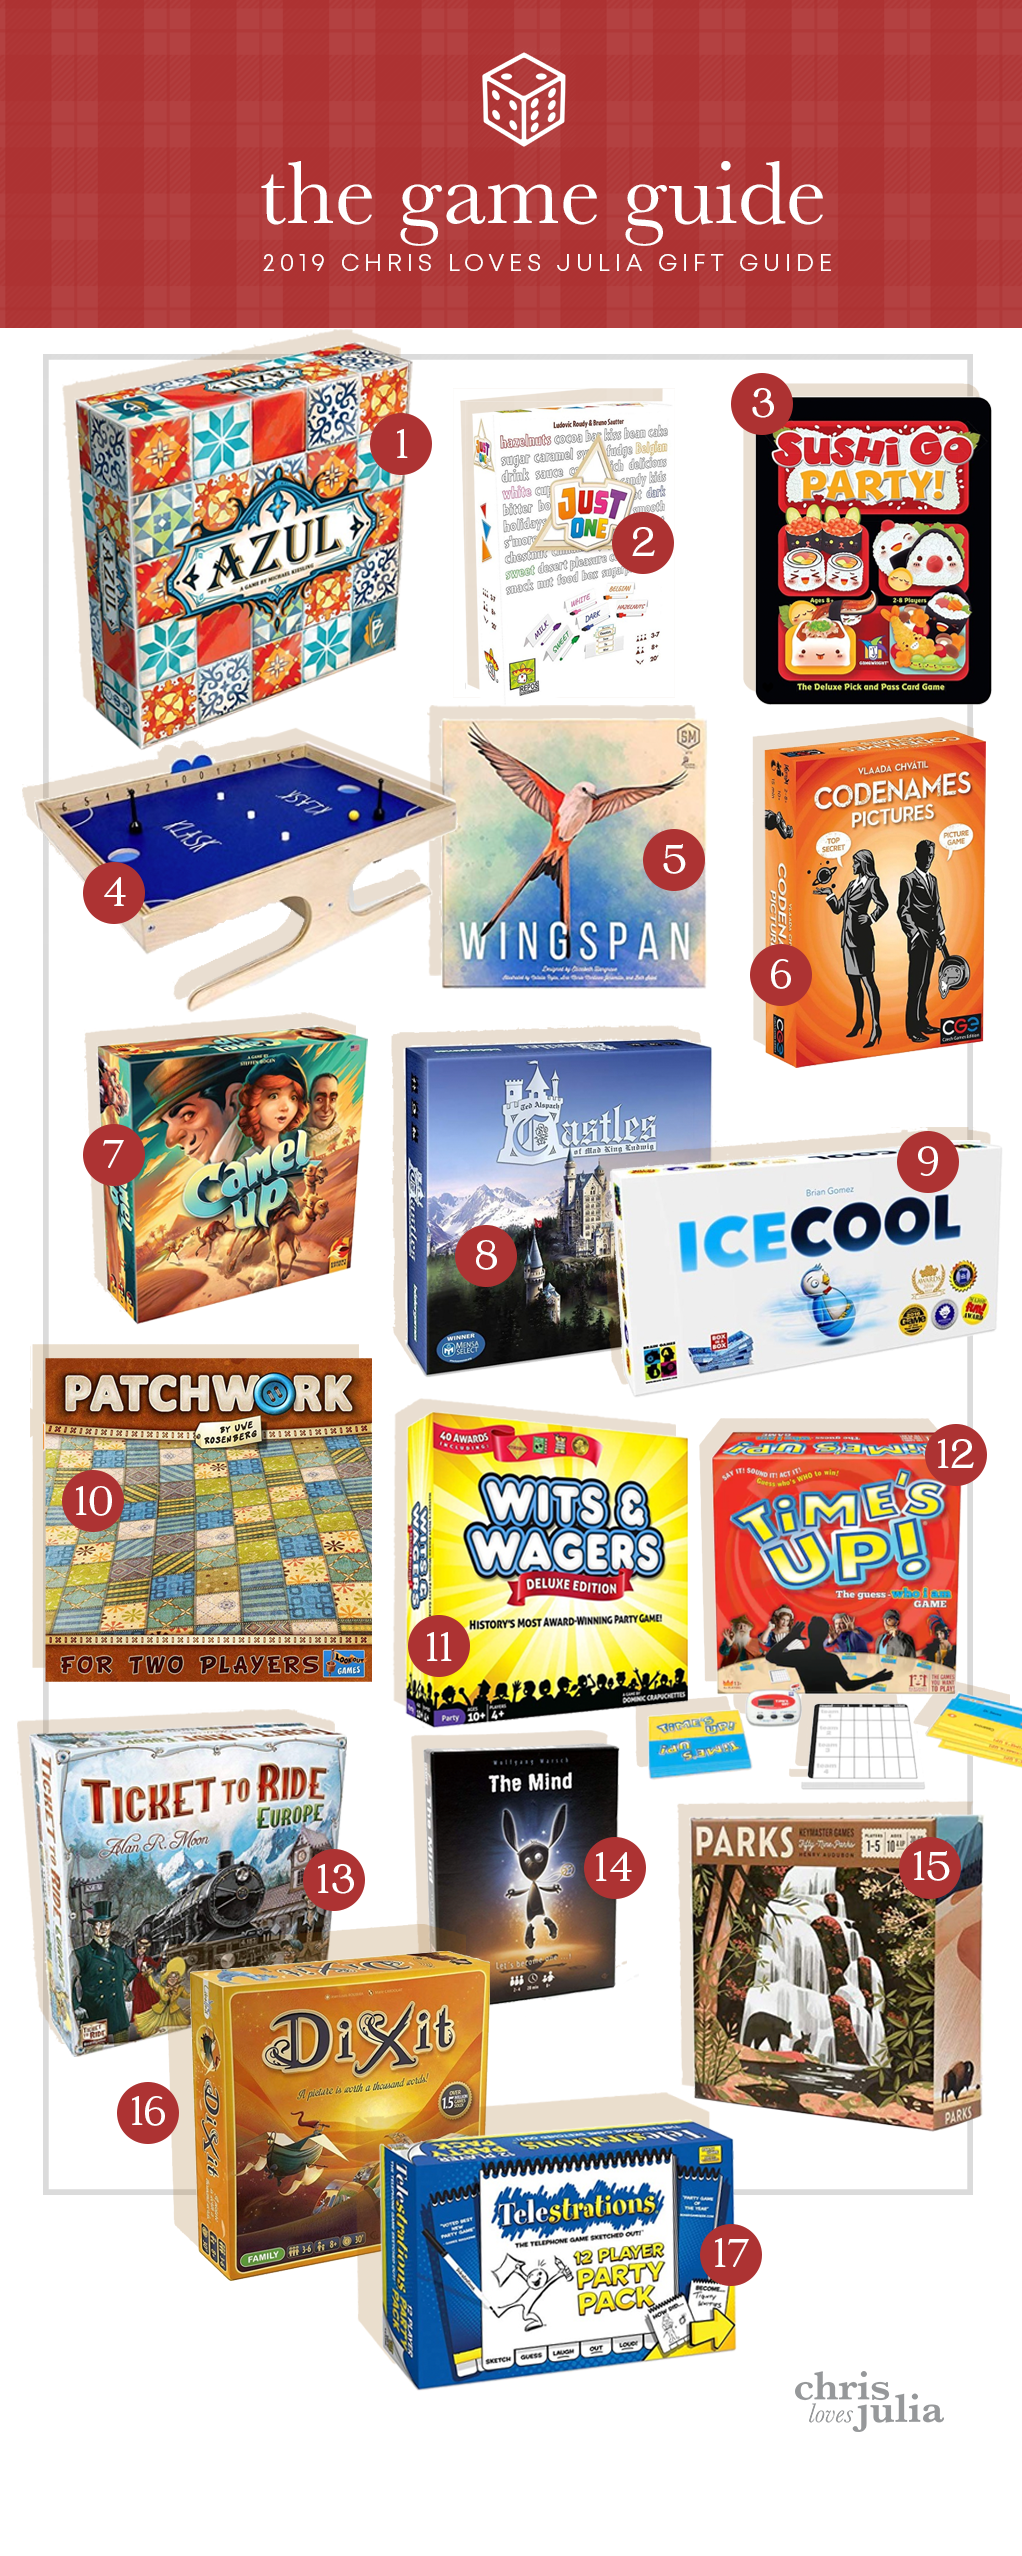 20 Best Board Games on PC - The All-Time Favorites